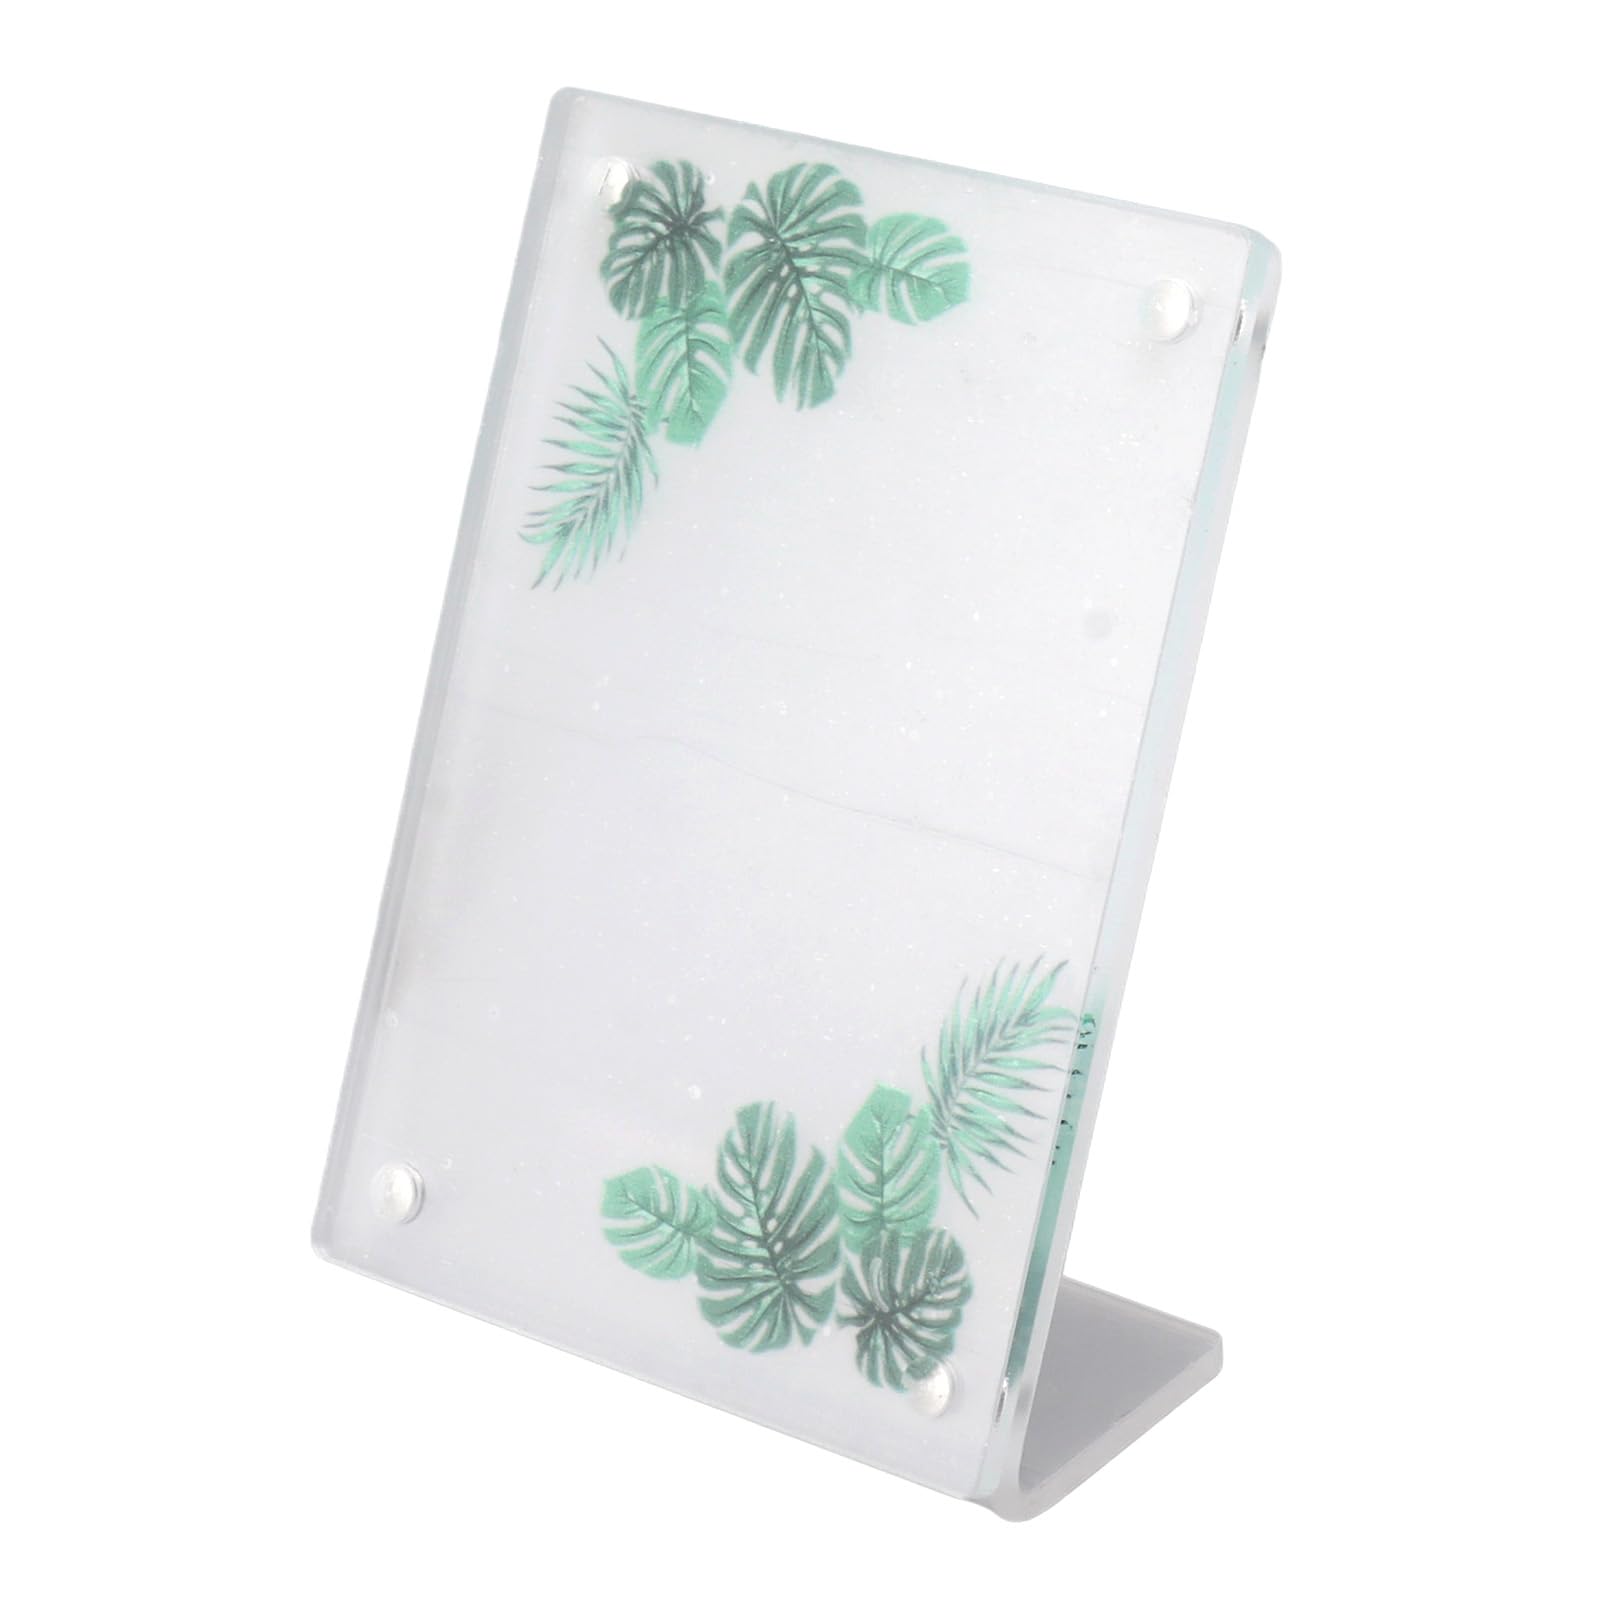 Photo Frame, Sturdy Acrylic Tabletop Photo Frame Decorative Clear Simple Cleaning for Home (Monstera Leaves)